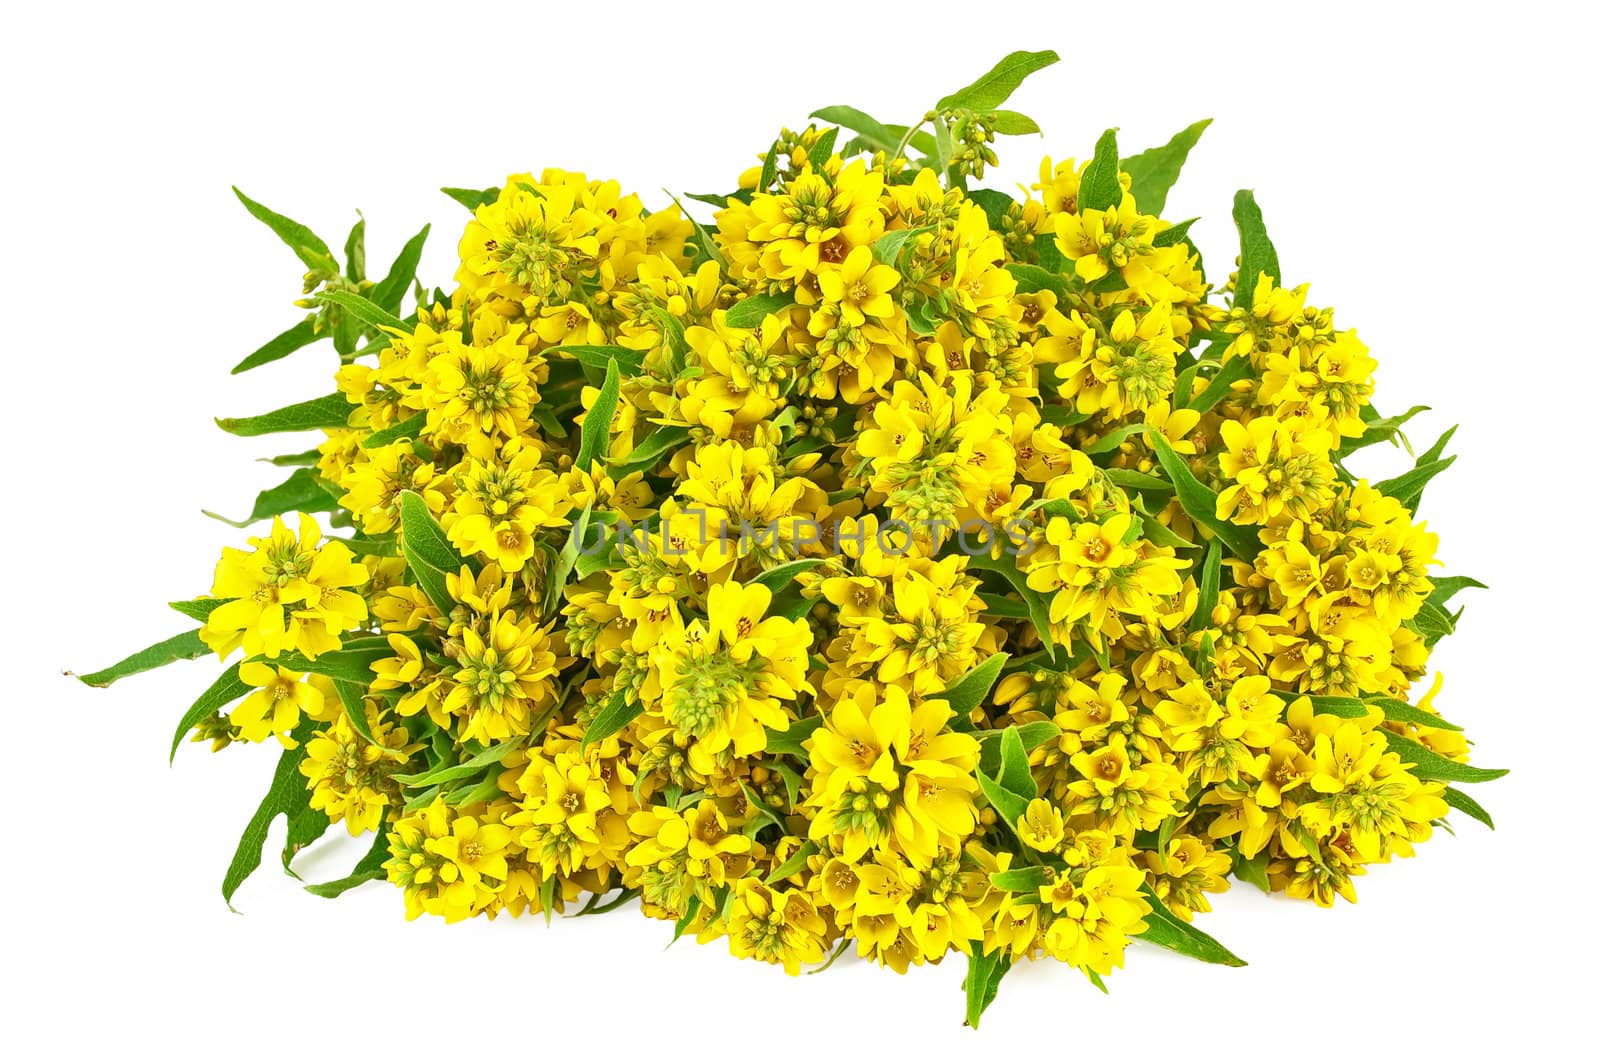 A bouquet of yellow flowers with green leaves isolated on white background